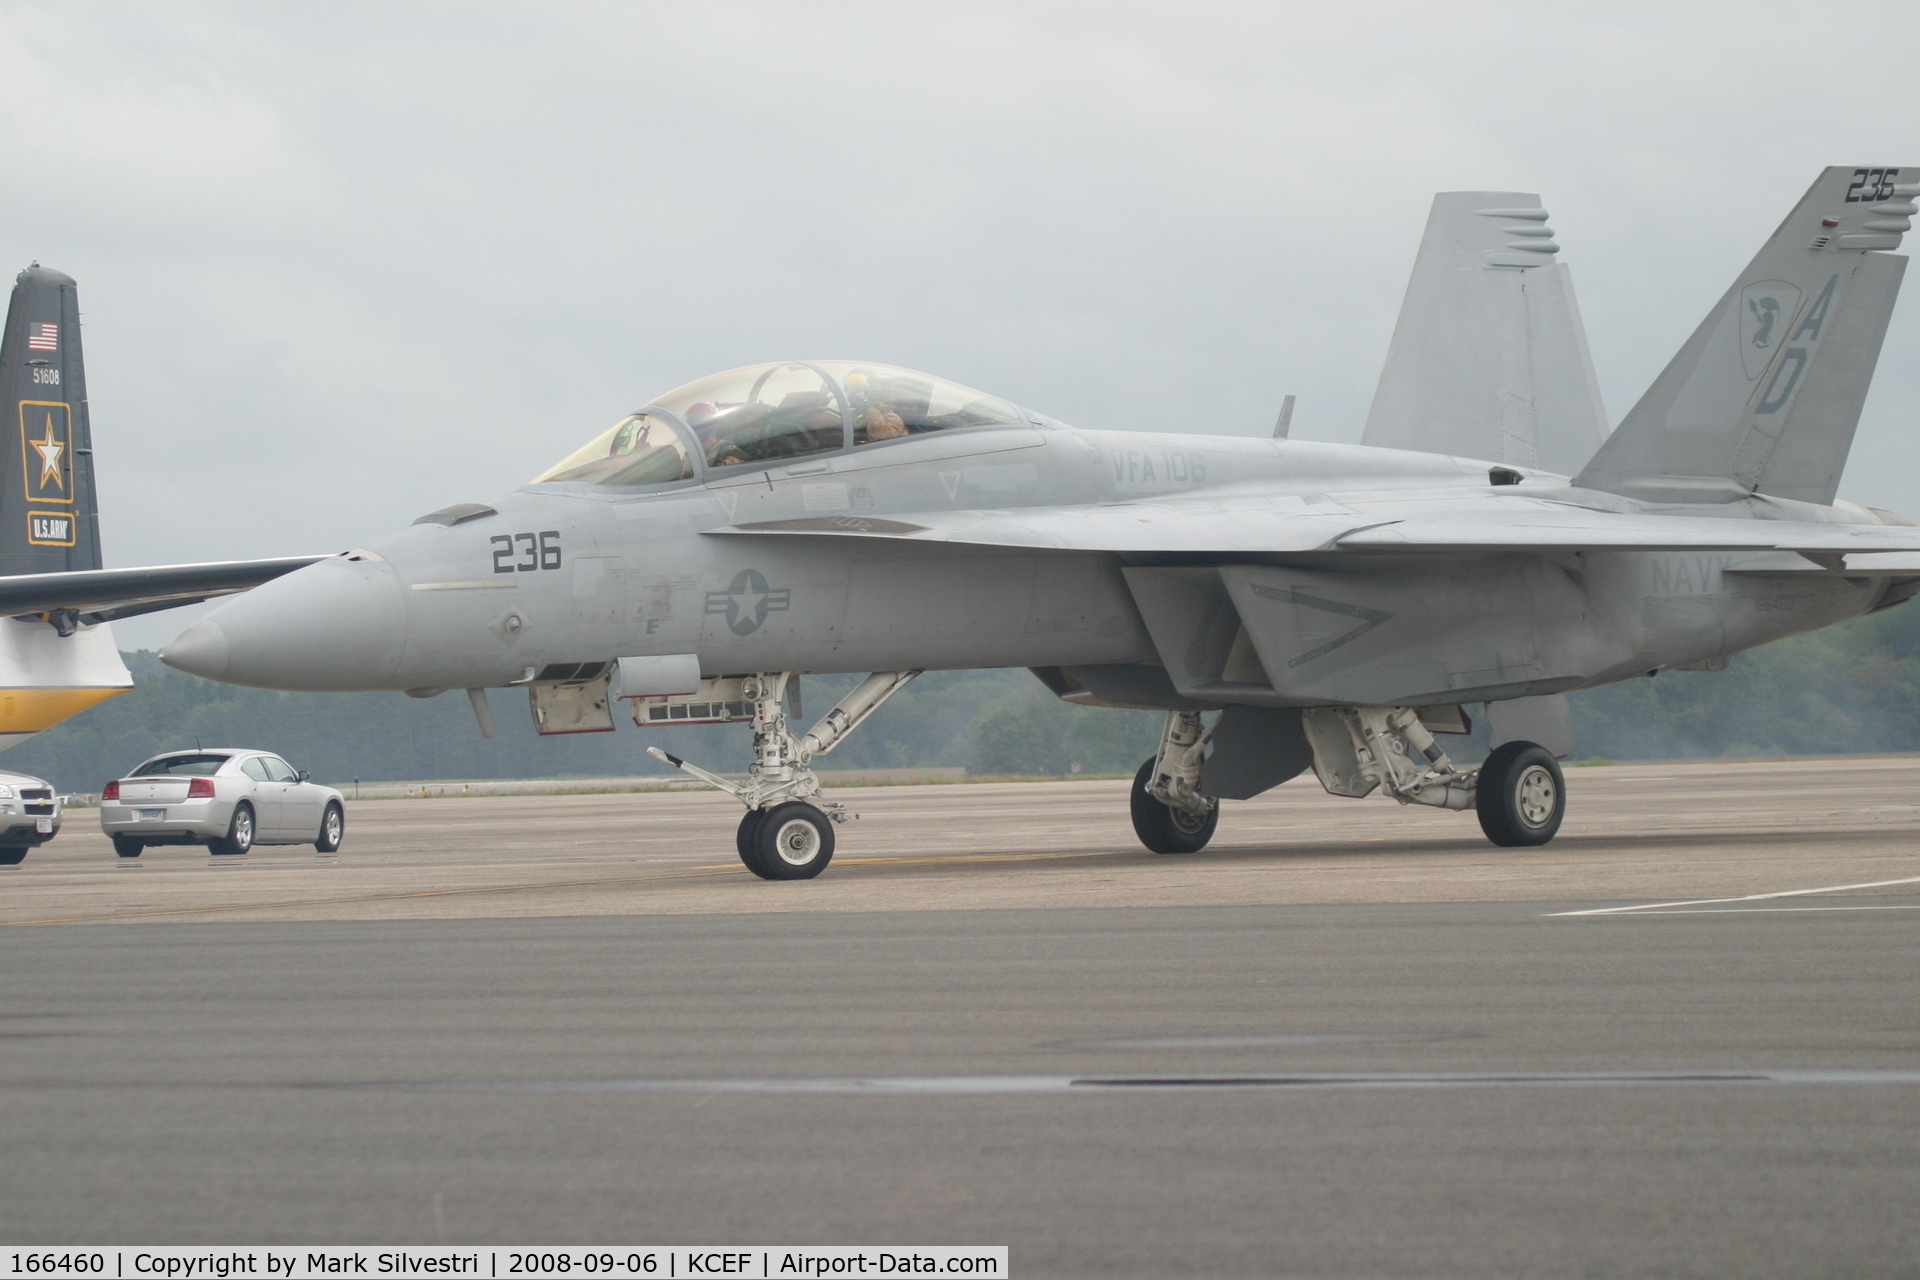 166460, Boeing F/A-18F Super Hornet C/N F095, Westover ARB 2008 - Flag and Menudo taxi for Takeoff